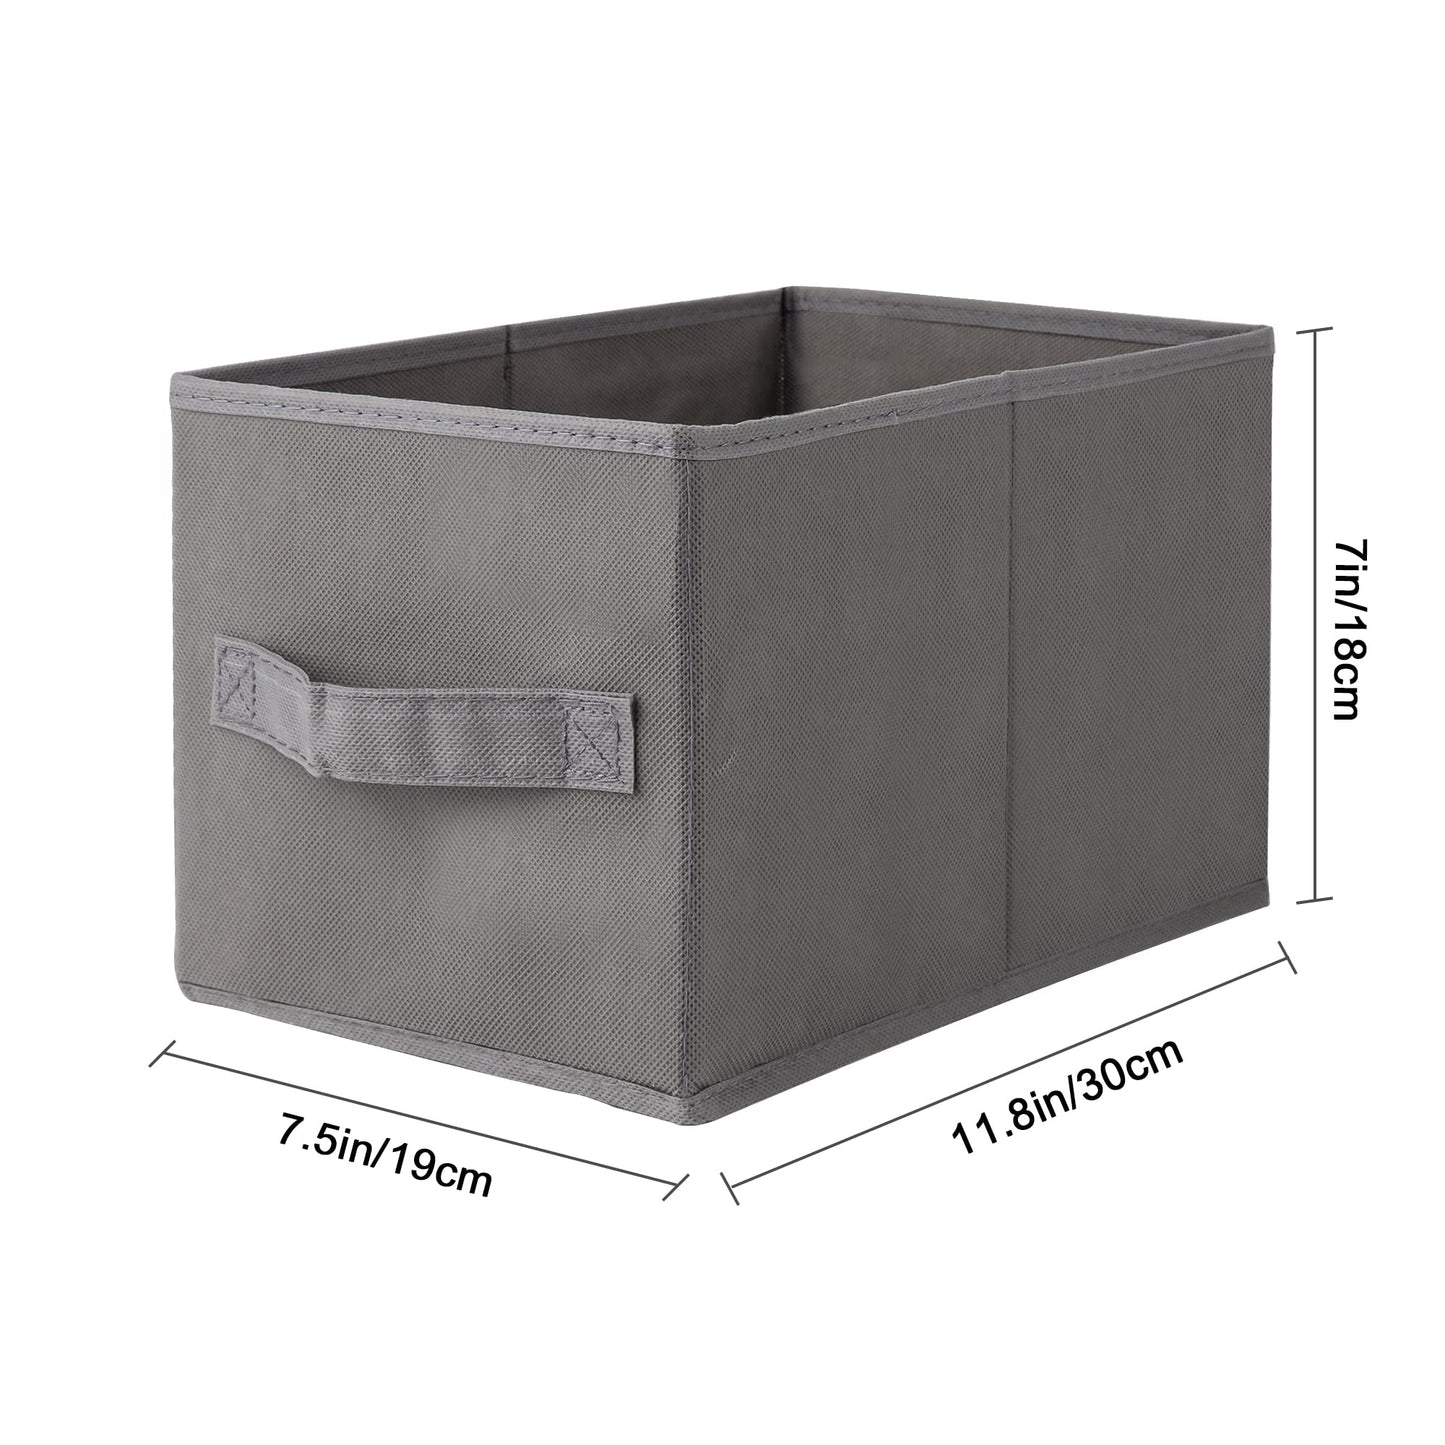 OYREL Storage Bins with Handles, 2 Pack, 7.5 * 11.8 * 7in, Collapsible Non-Woven Fabric Storage Bins for Shelves, Closet Organizers with Handles, Fabric Box for Home